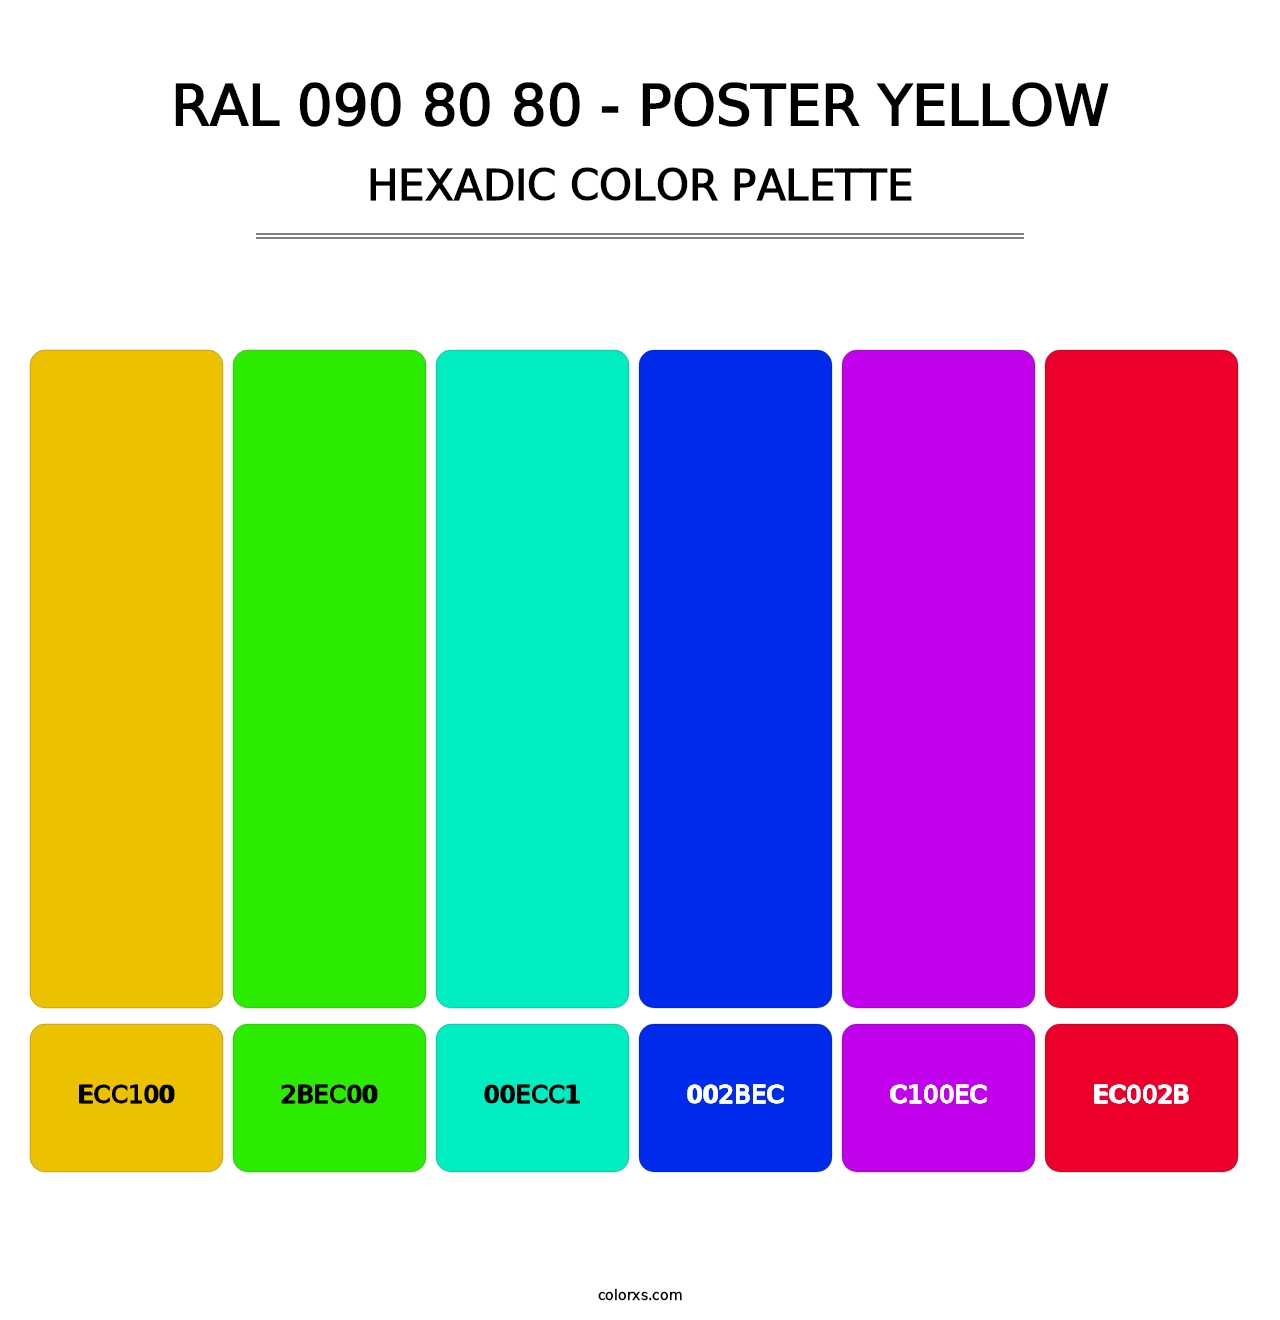 RAL 090 80 80 - Poster Yellow - Hexadic Color Palette